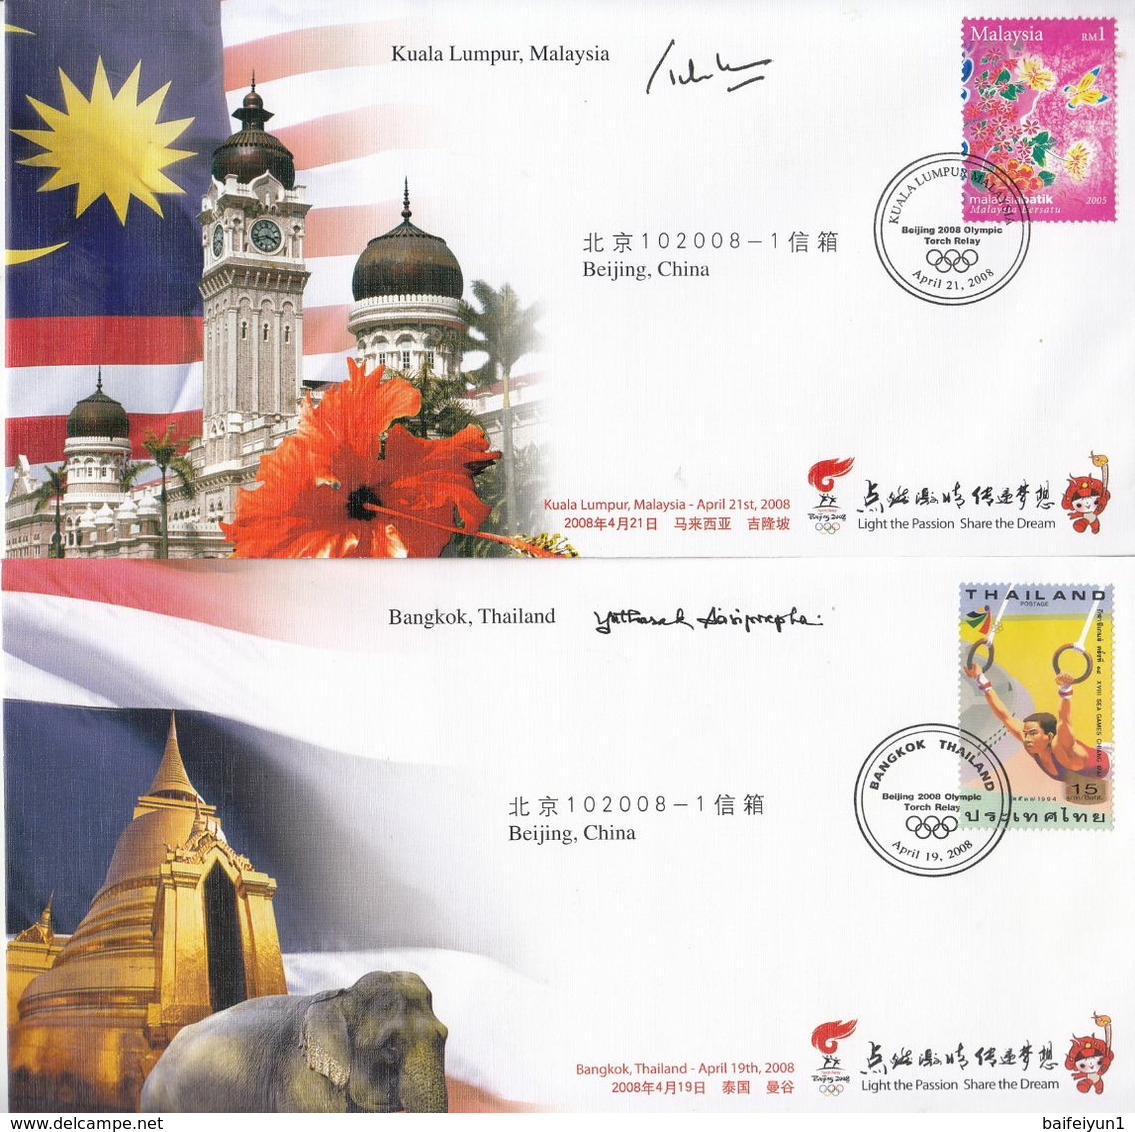 China 2008 Torch Relay of the Beijing 2008 Olympic Games(International)-Commemorative covers(21V)